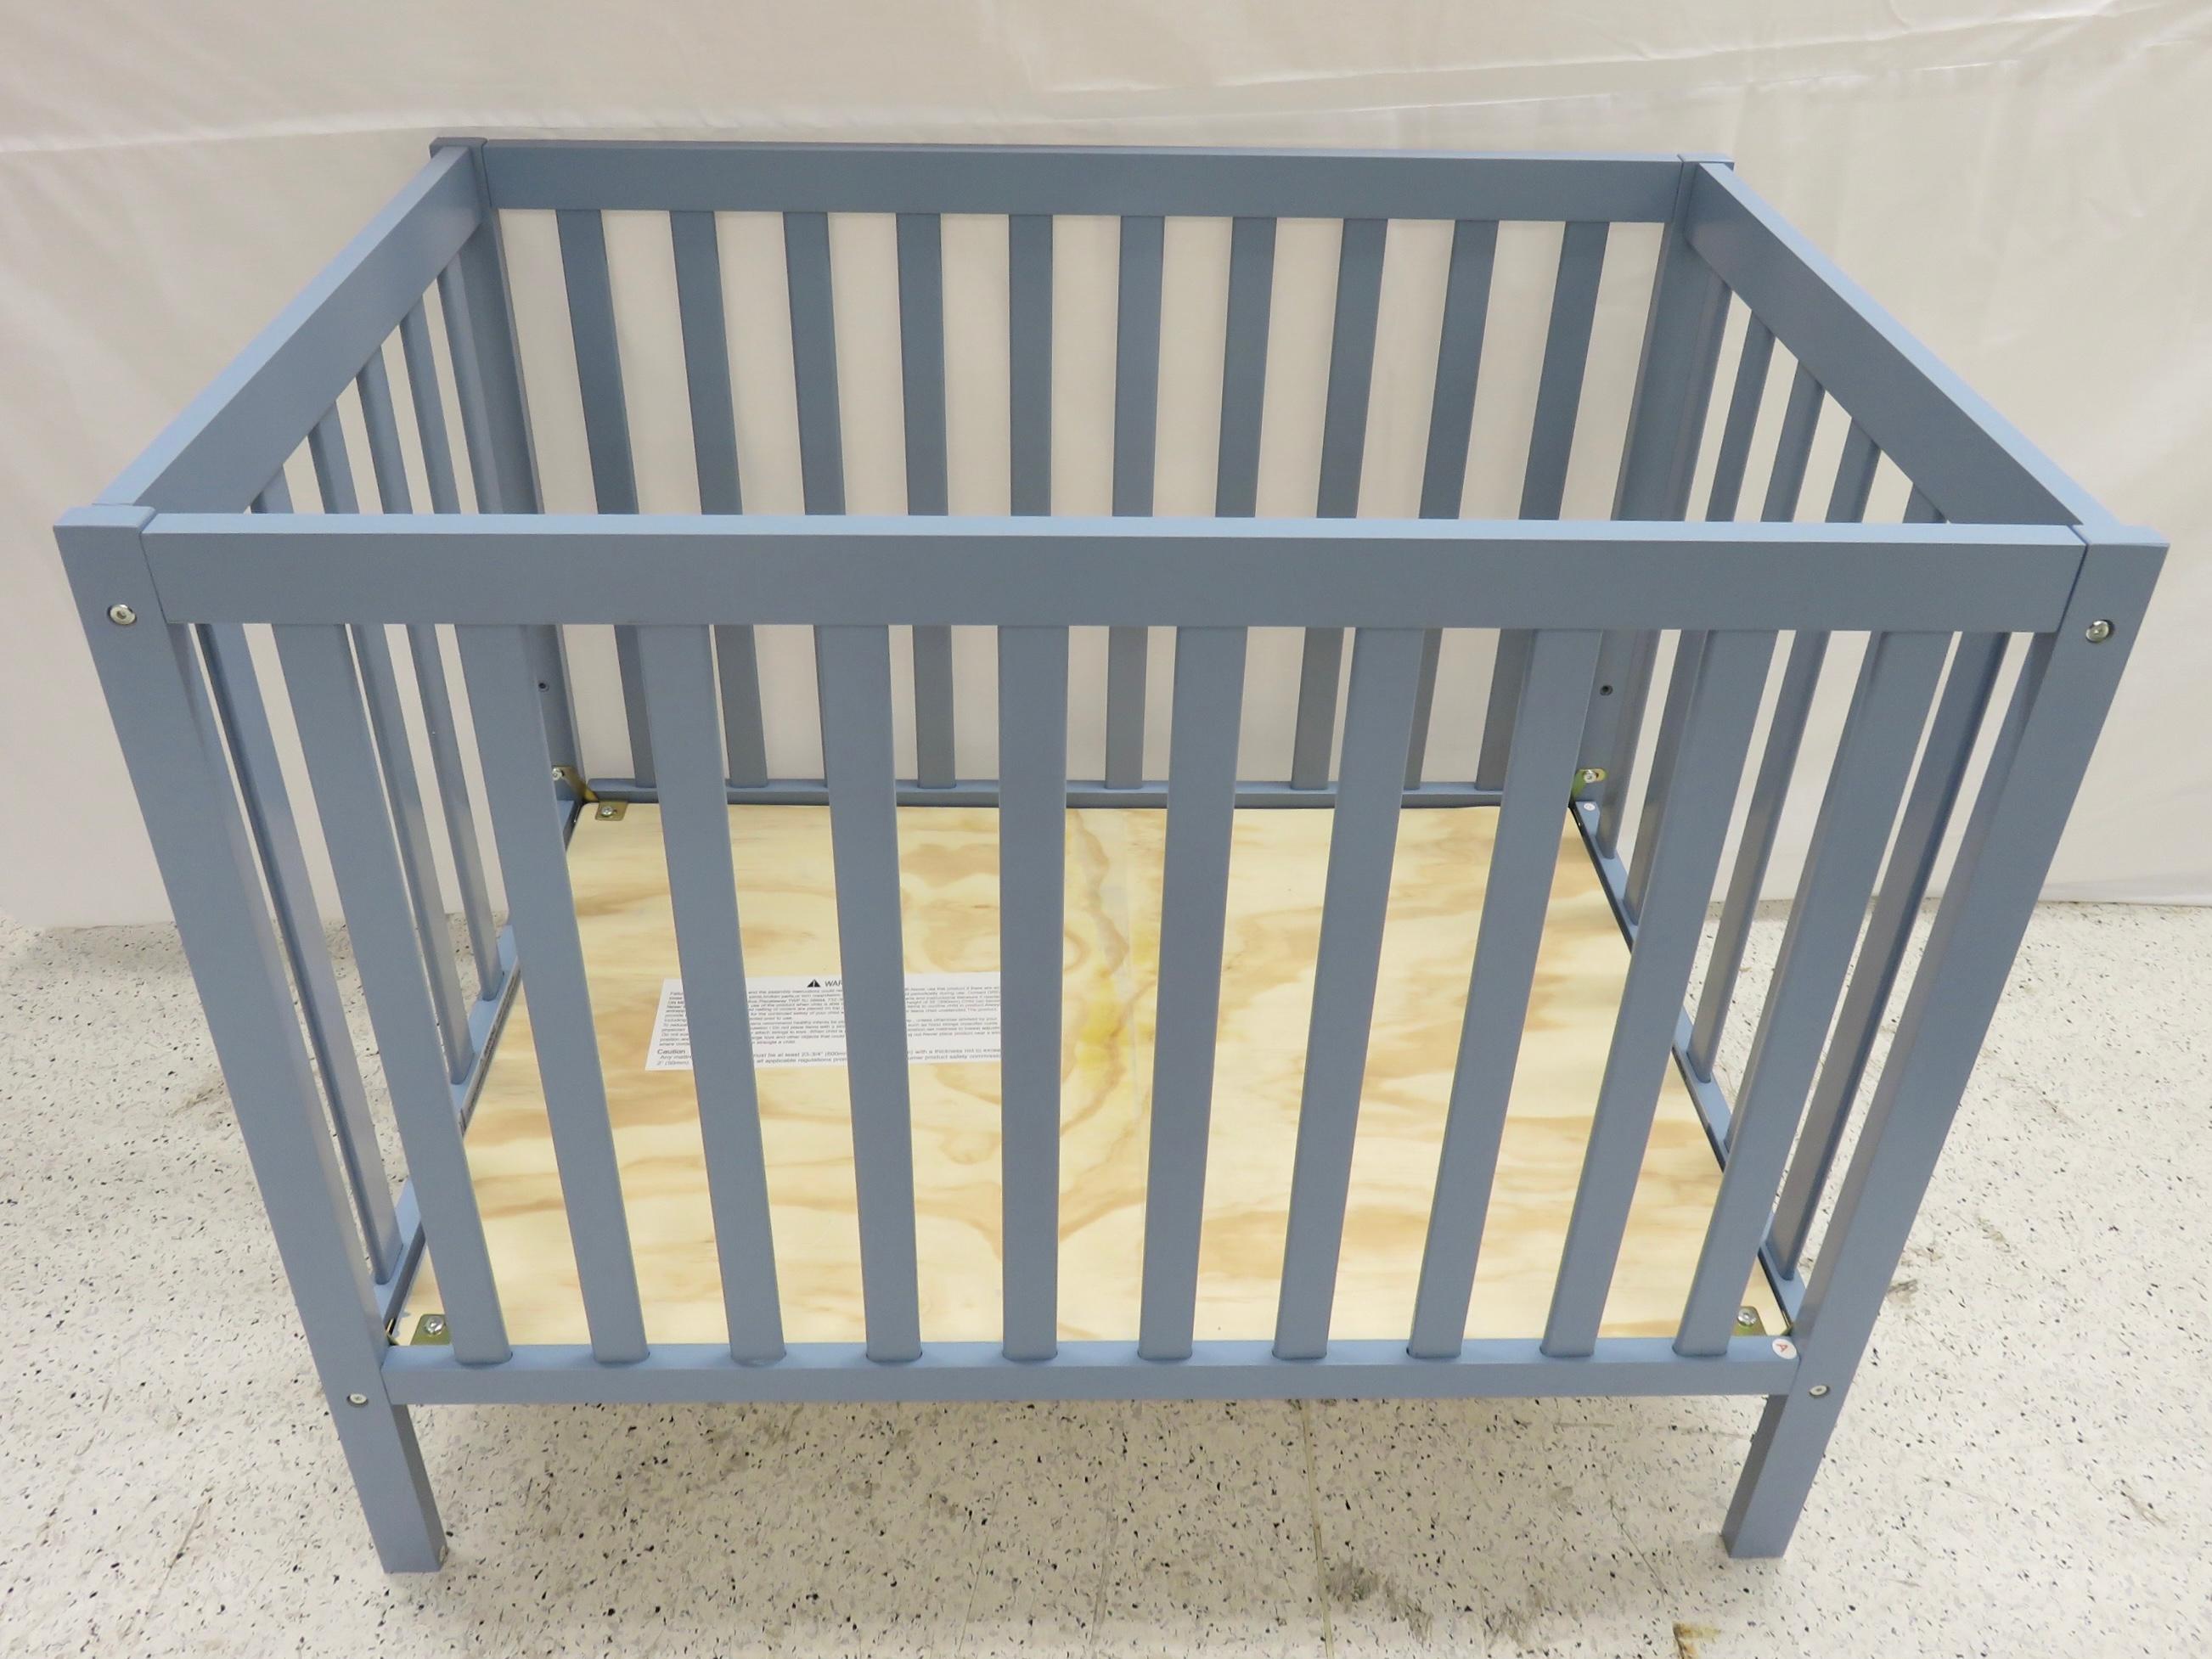 Hong Kong Customs today (March 3) reminded members of the public to stay alert to an unsafe model of a cot. Test results indicated that the cot might pose a structural safety hazard. Photo shows the cot concerned.